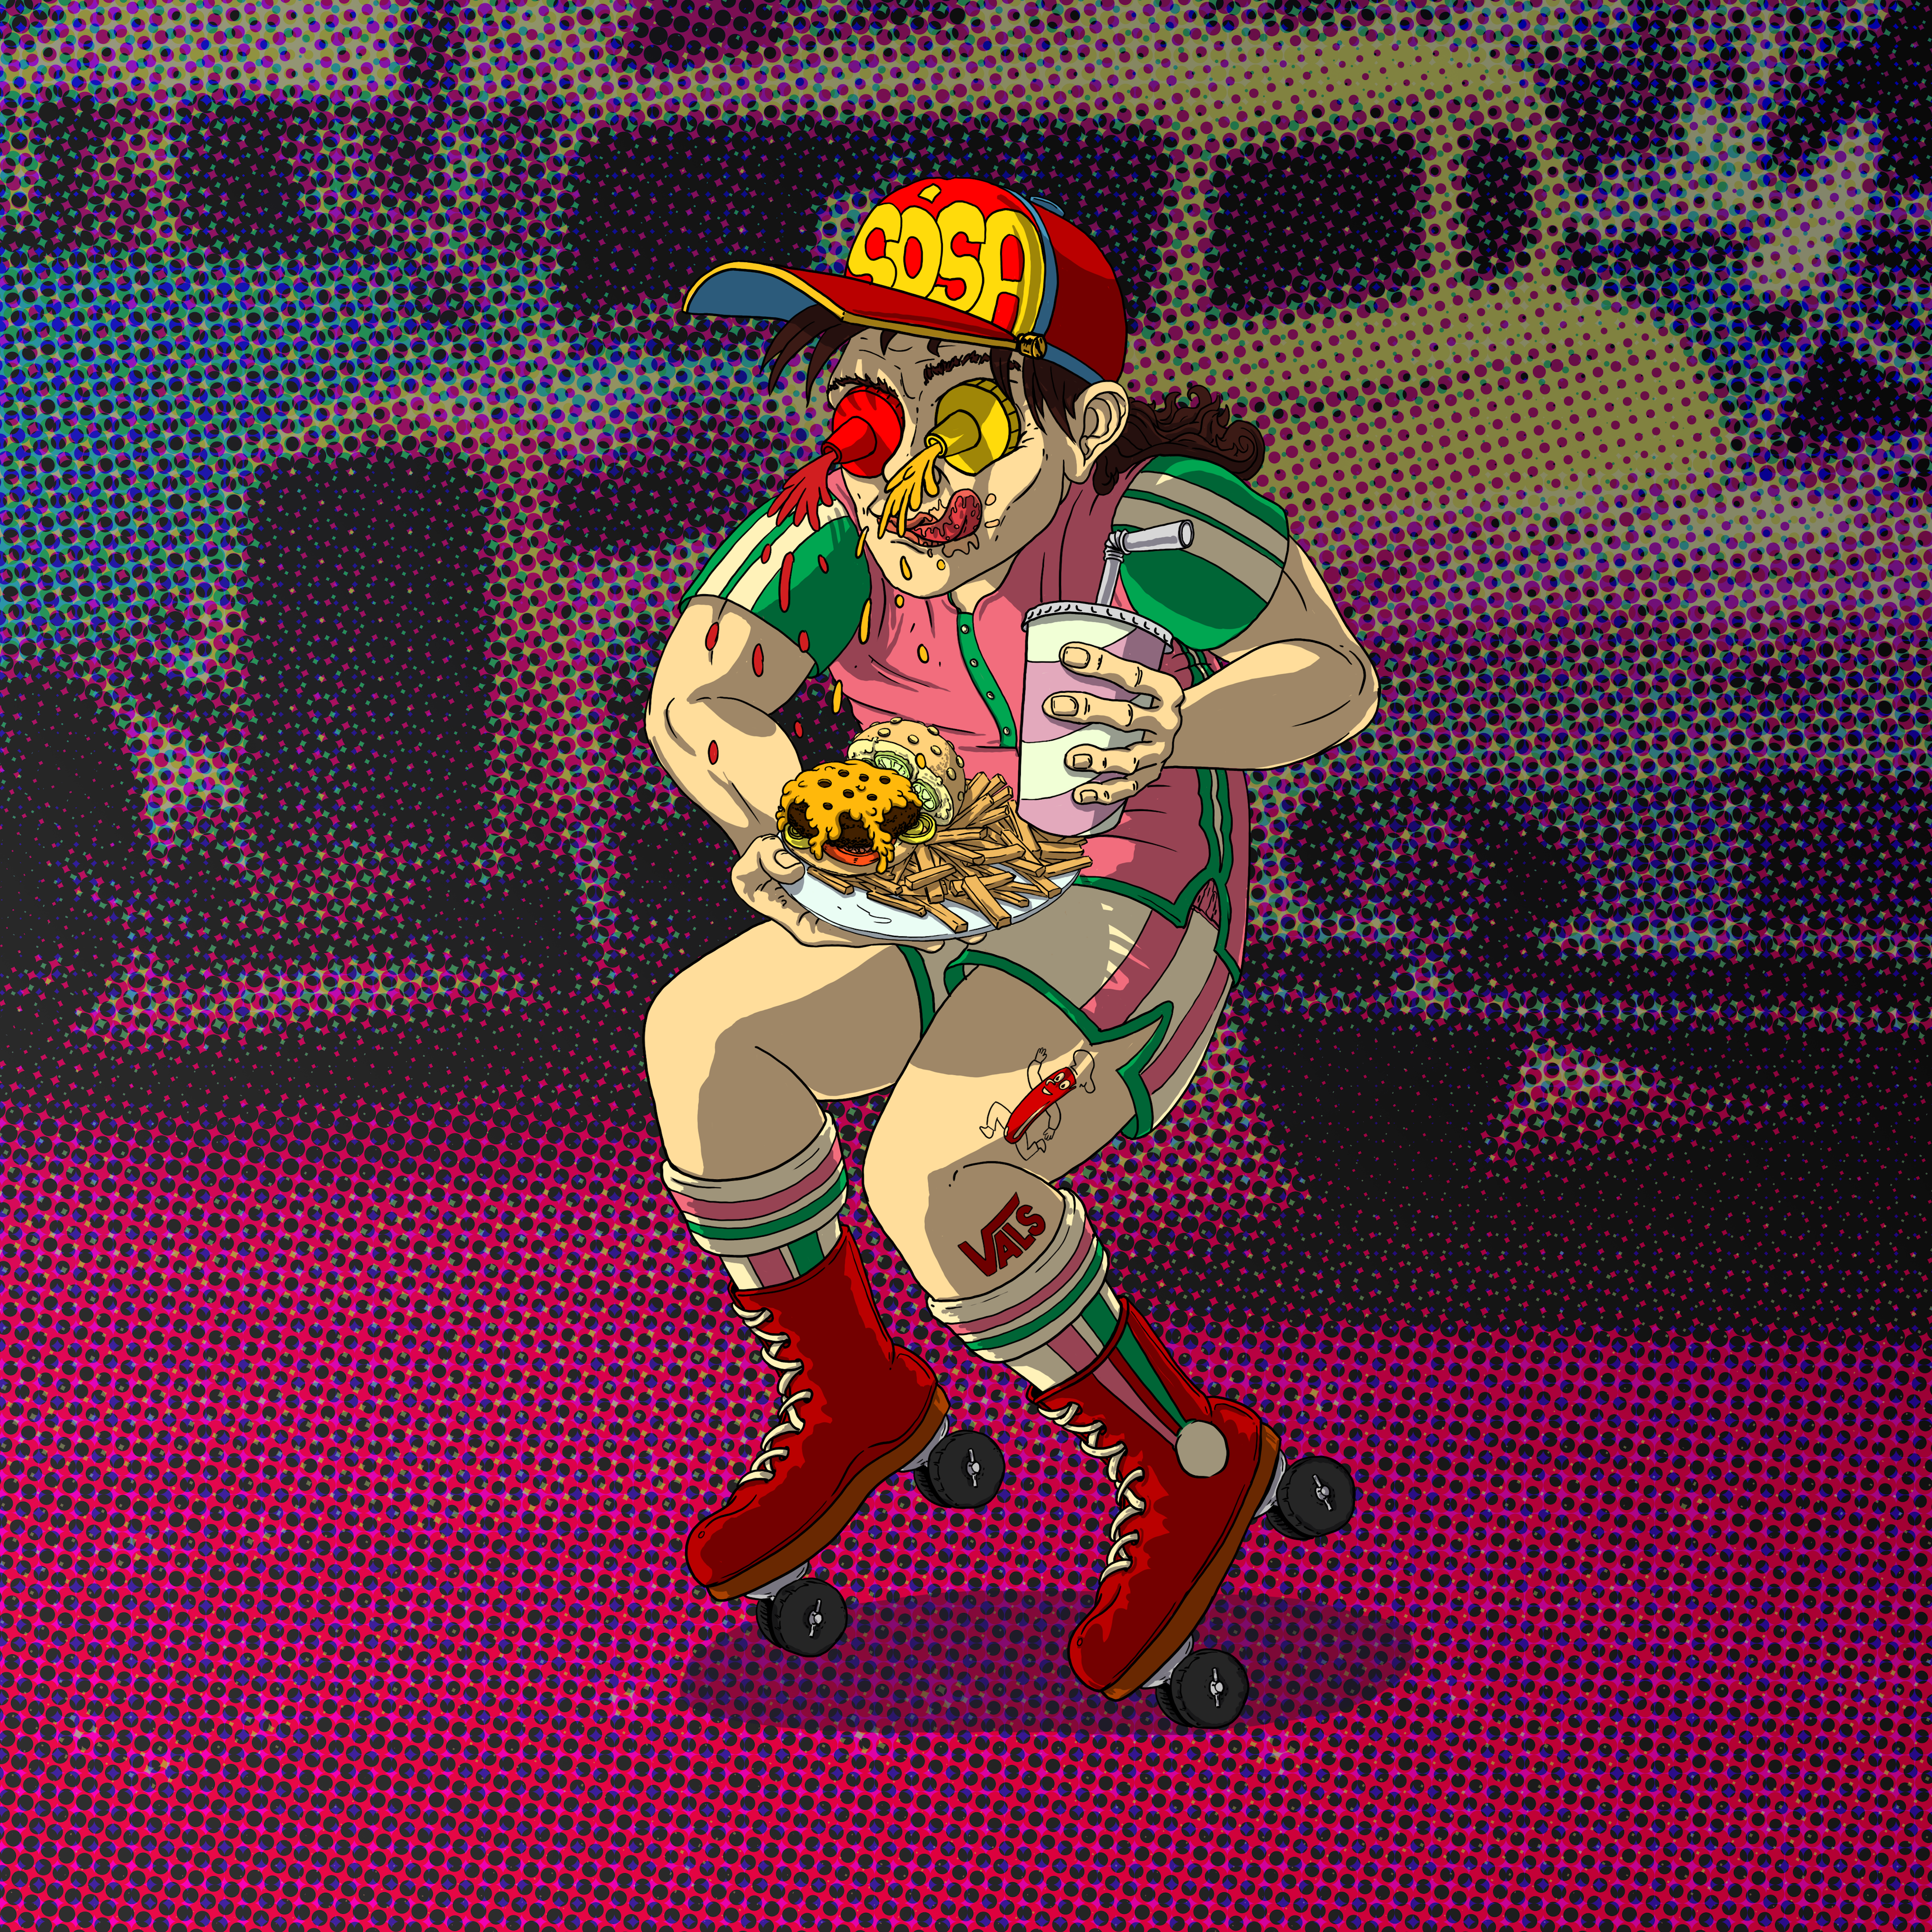 I have always wanted to have a burger delivered to me on roller skates...(yes, it's a weird "design" image).